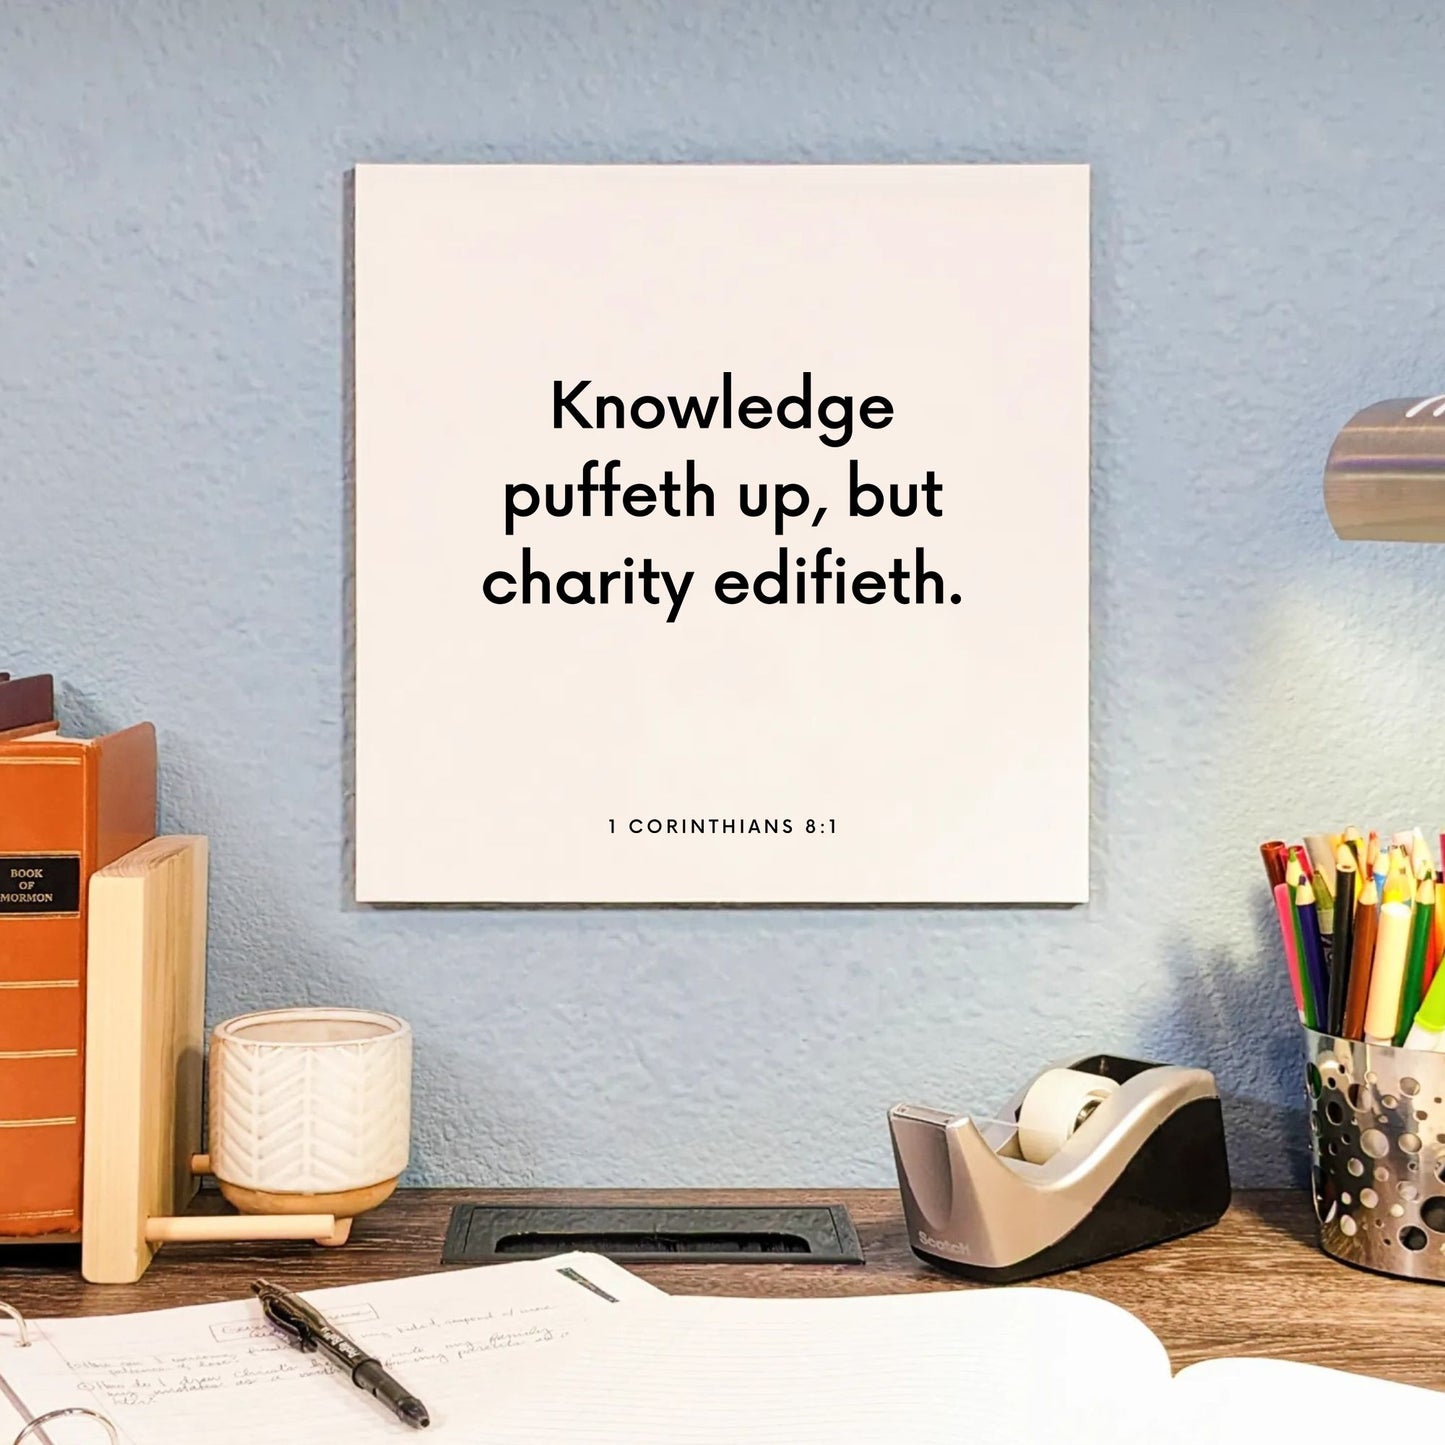 Desk mouting of the scripture tile for 1 Corinthians 8:1 - "Knowledge puffeth up, but charity edifieth"